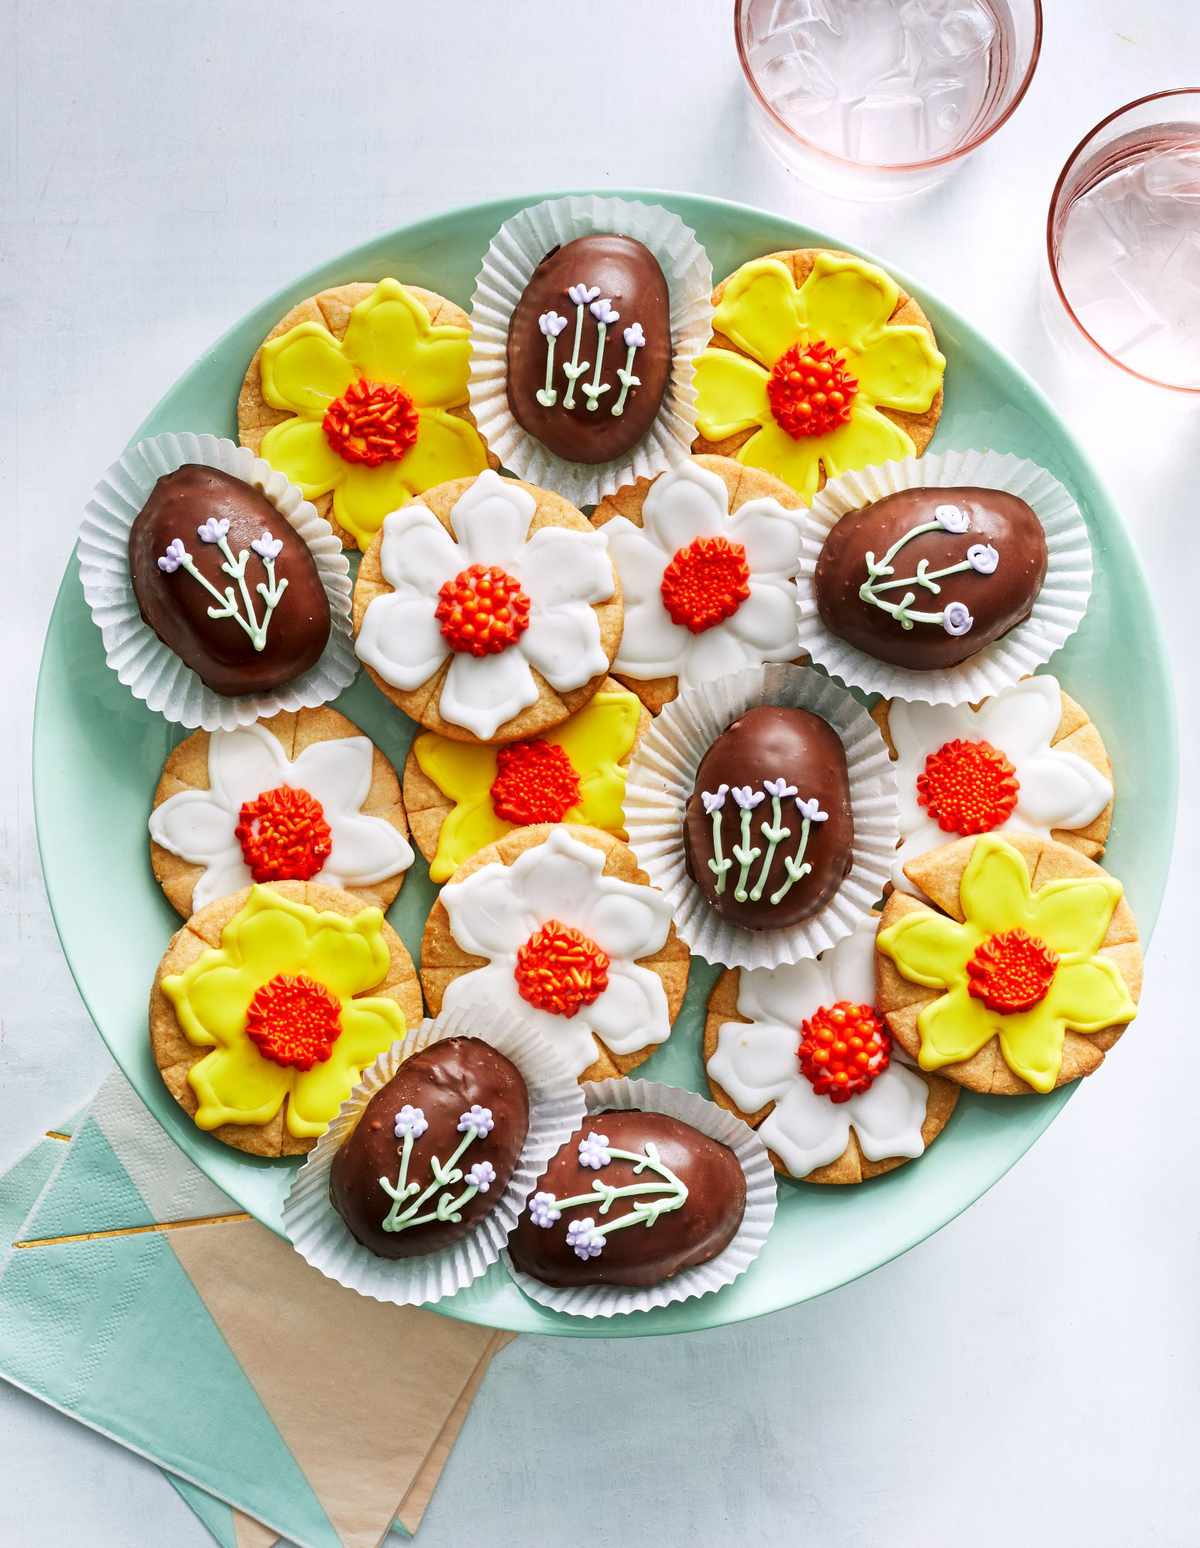 Festive Easter Recipes Your Family Will Love - cover